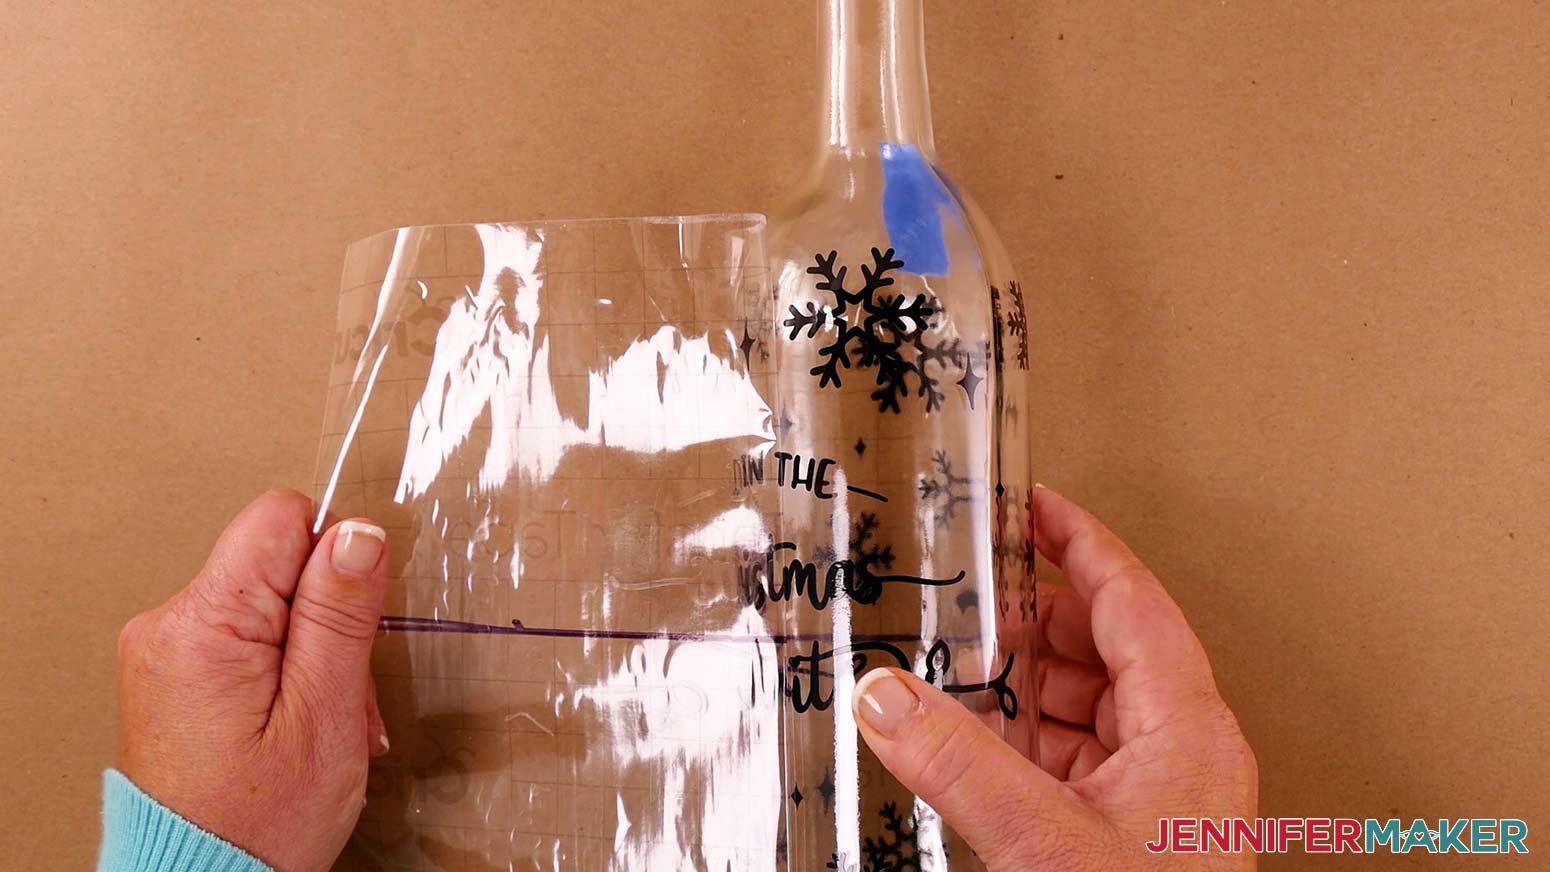 Carefully remove the transfer tape from your etched wine glasses and bottles design after it's adhered to the bottle